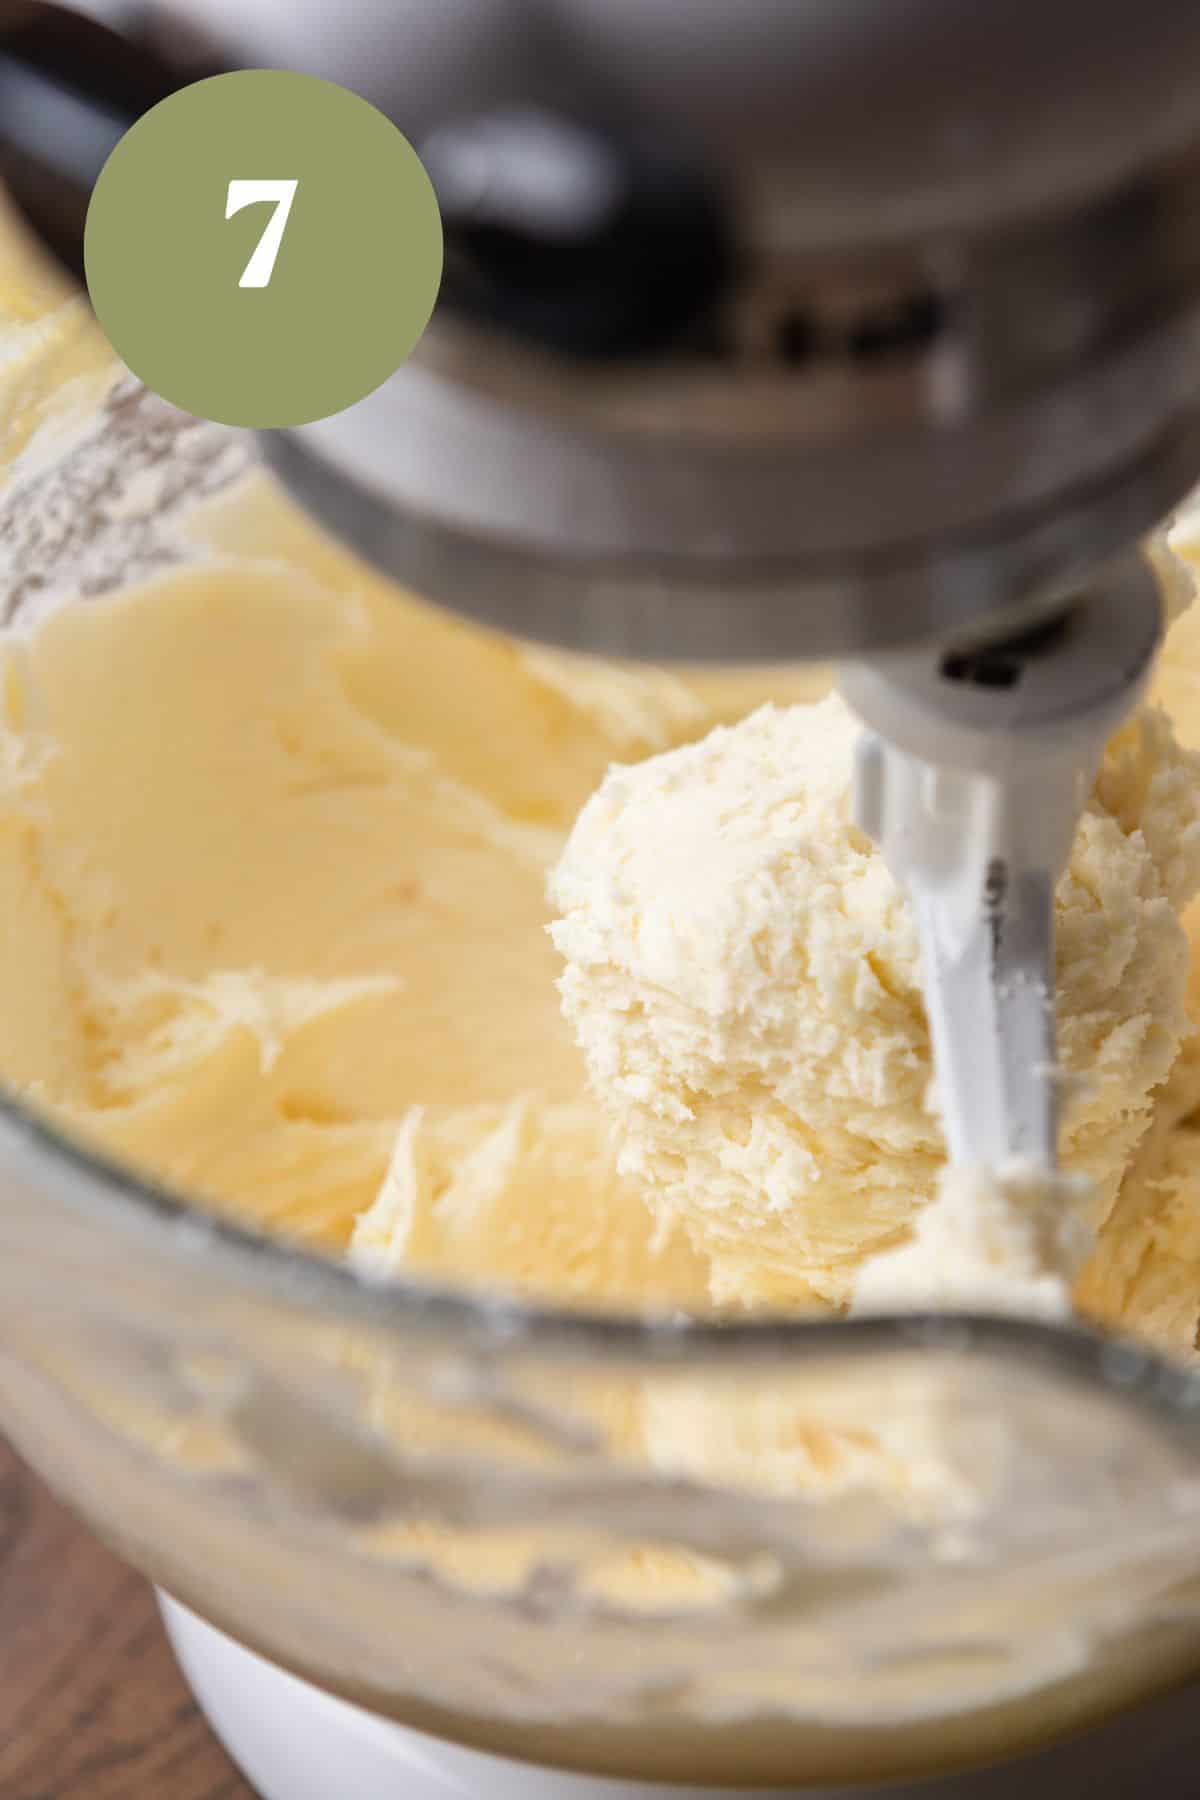 Cream cheese frosting being mixed in the bowl of a stand mixer.